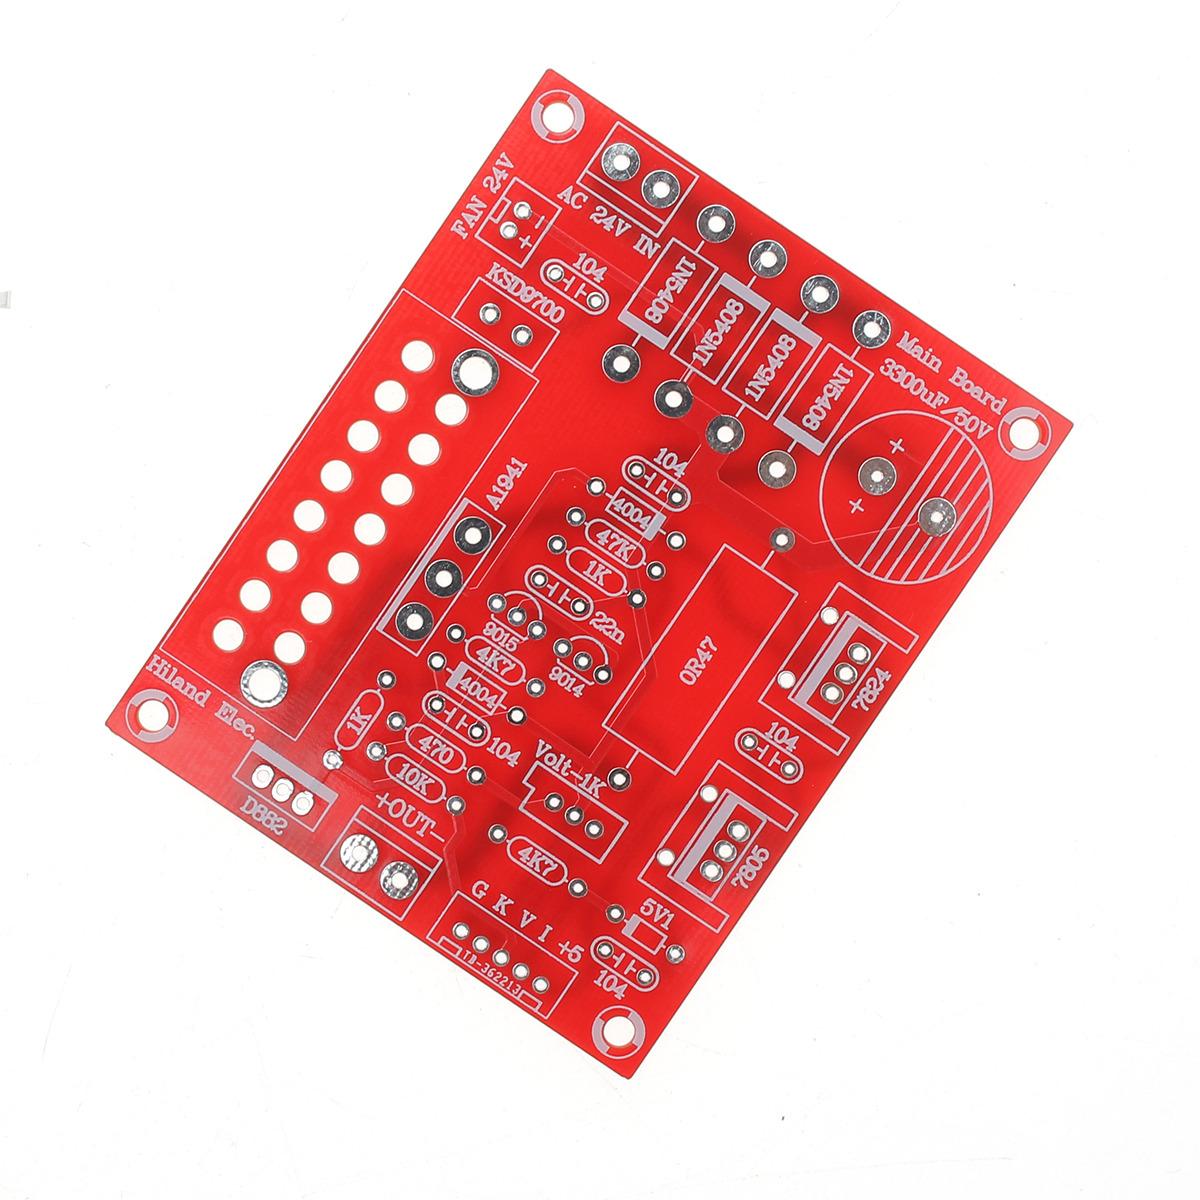 0-28V 0.01-2A Adjustable DC Regulated Power Supply Module DIY Kit Short Circuit Current Limiting Protection 18